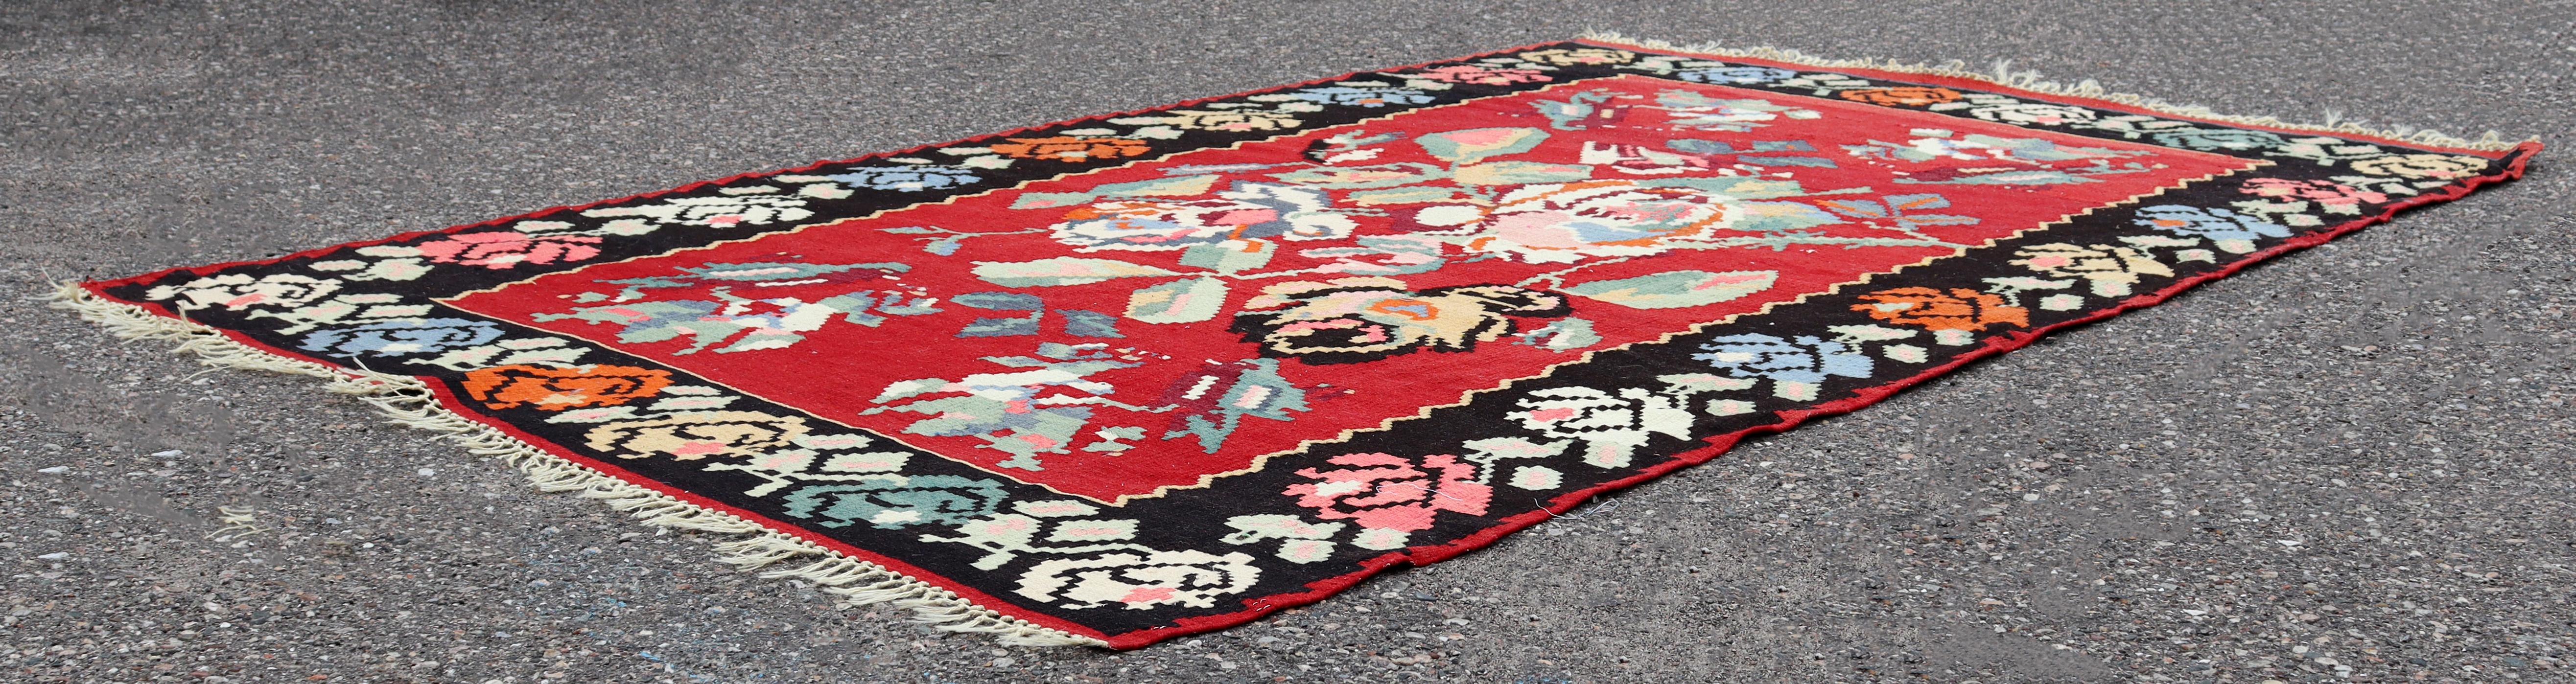 Asian Mid Century Modern Kilim Wool Area Rug Red Hand Made in Turkey Floral Pattern For Sale